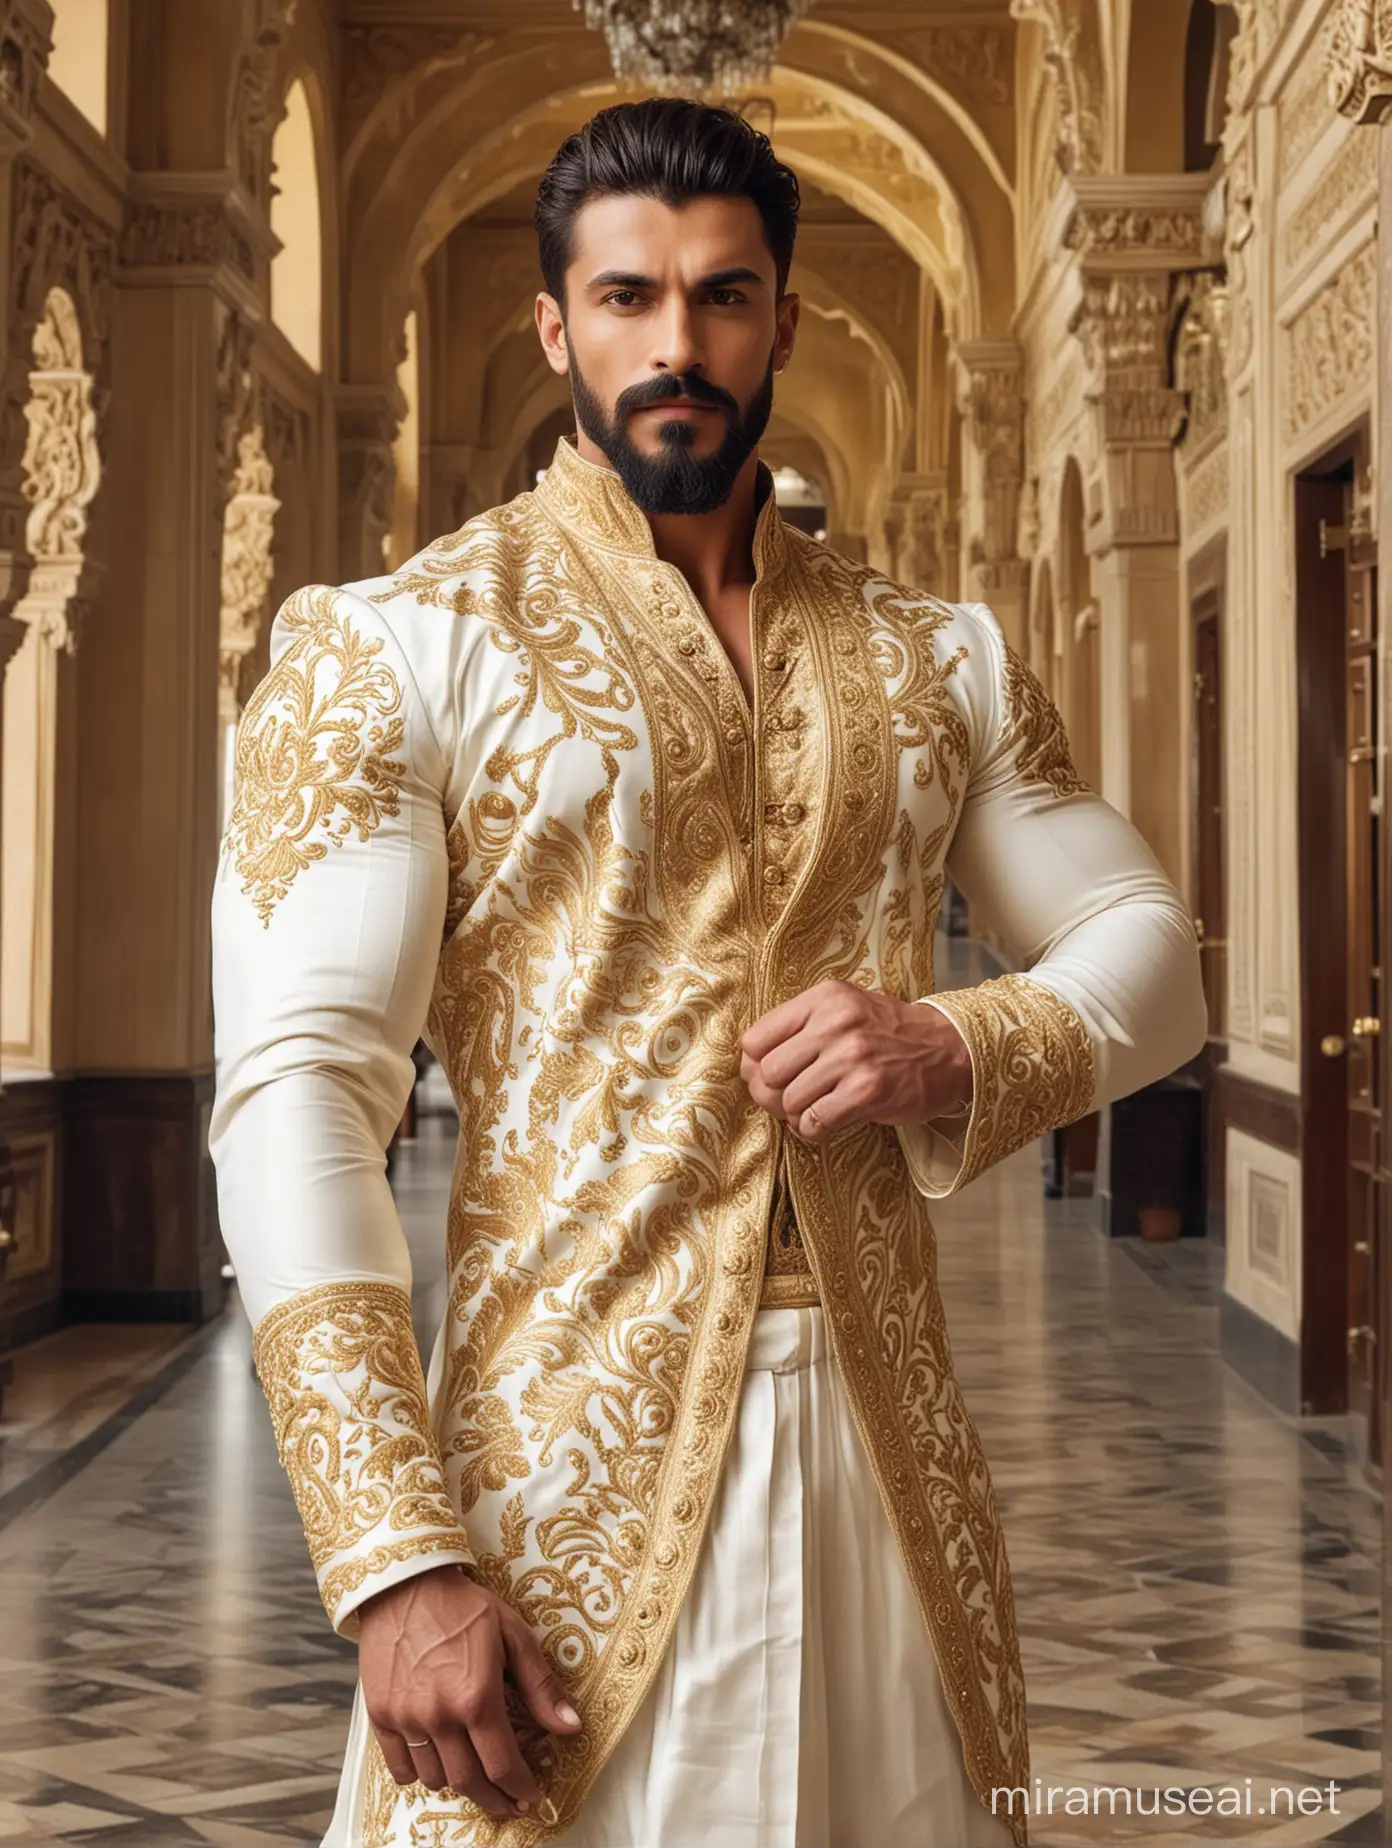 Tall and handsome bodybuilder men with beautiful hairstyle and beard with big wide shoulder and chest in white and golden sherwani and standing inside palace and showing his biceps 